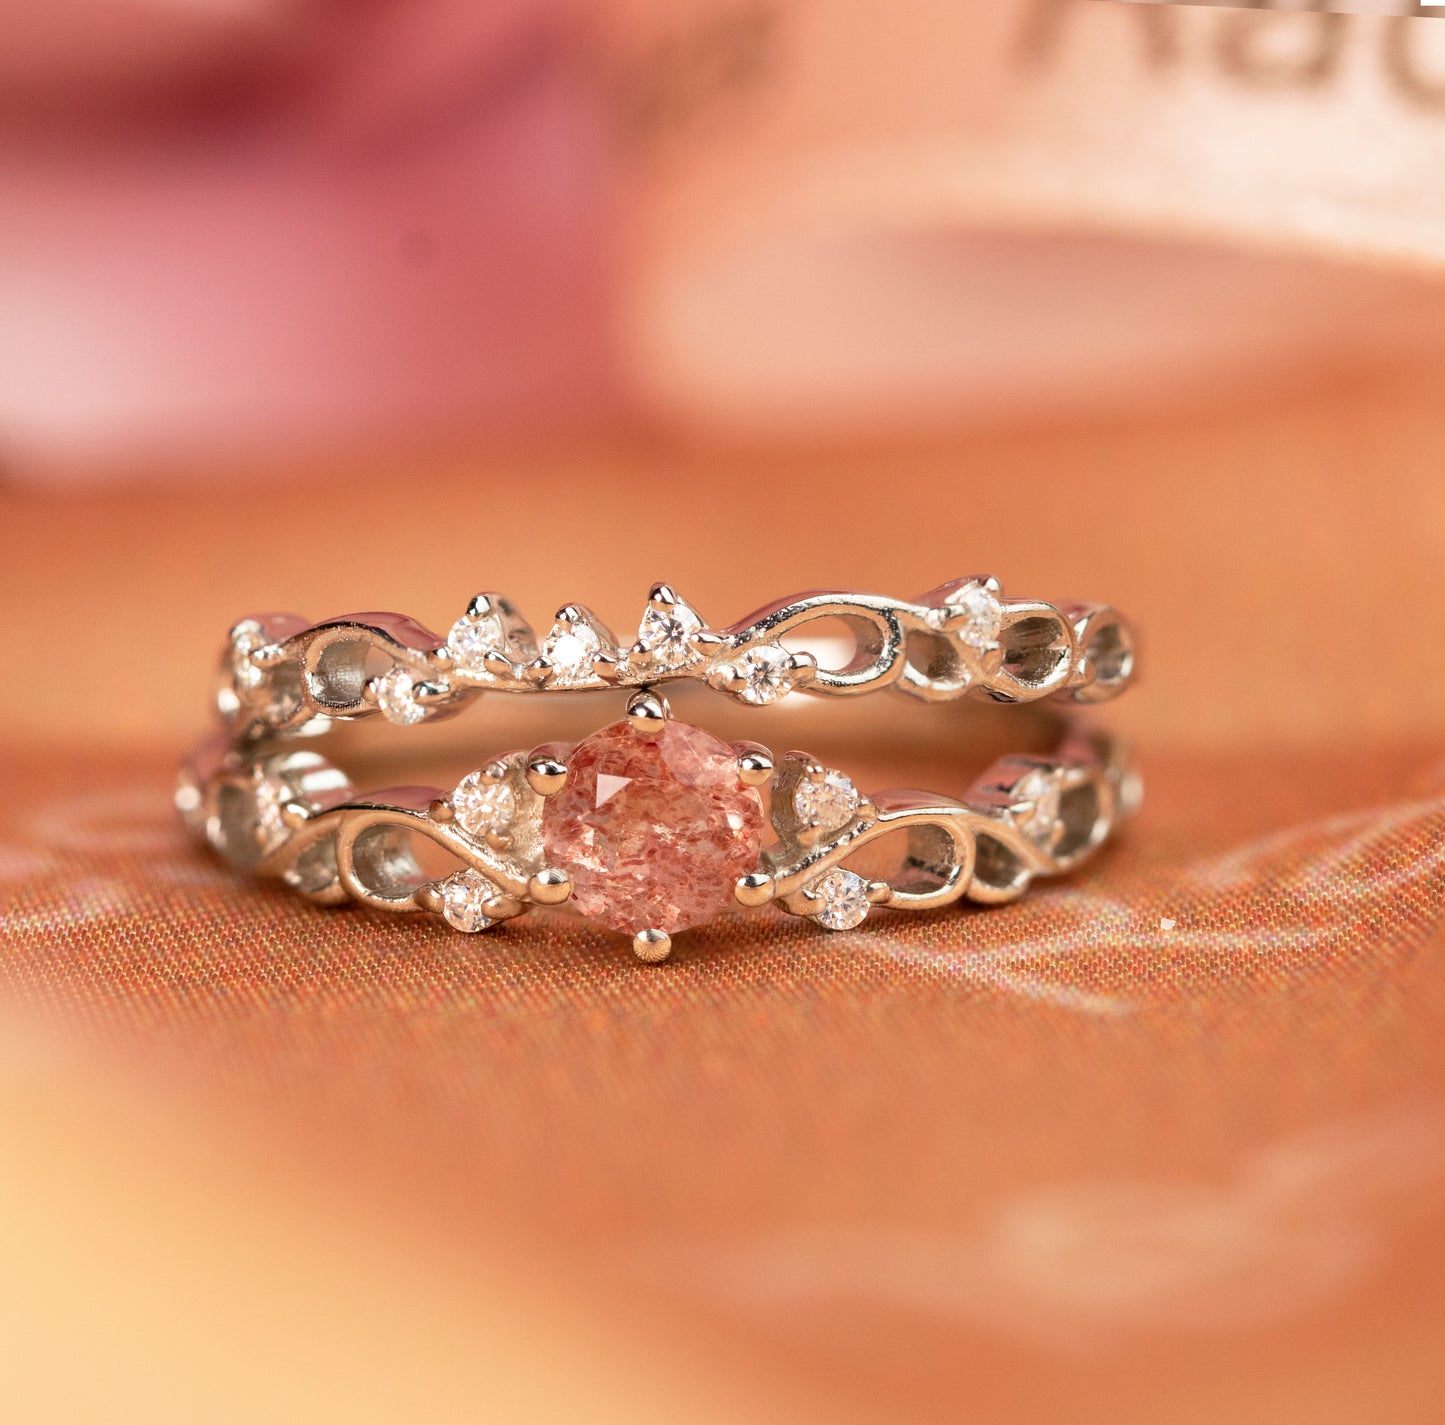 Vintage-inspired 0.7 carat Round Shaped Strawberry Quartz and Diamond Accent Delicate Female Wedding Ring Set in White Gold